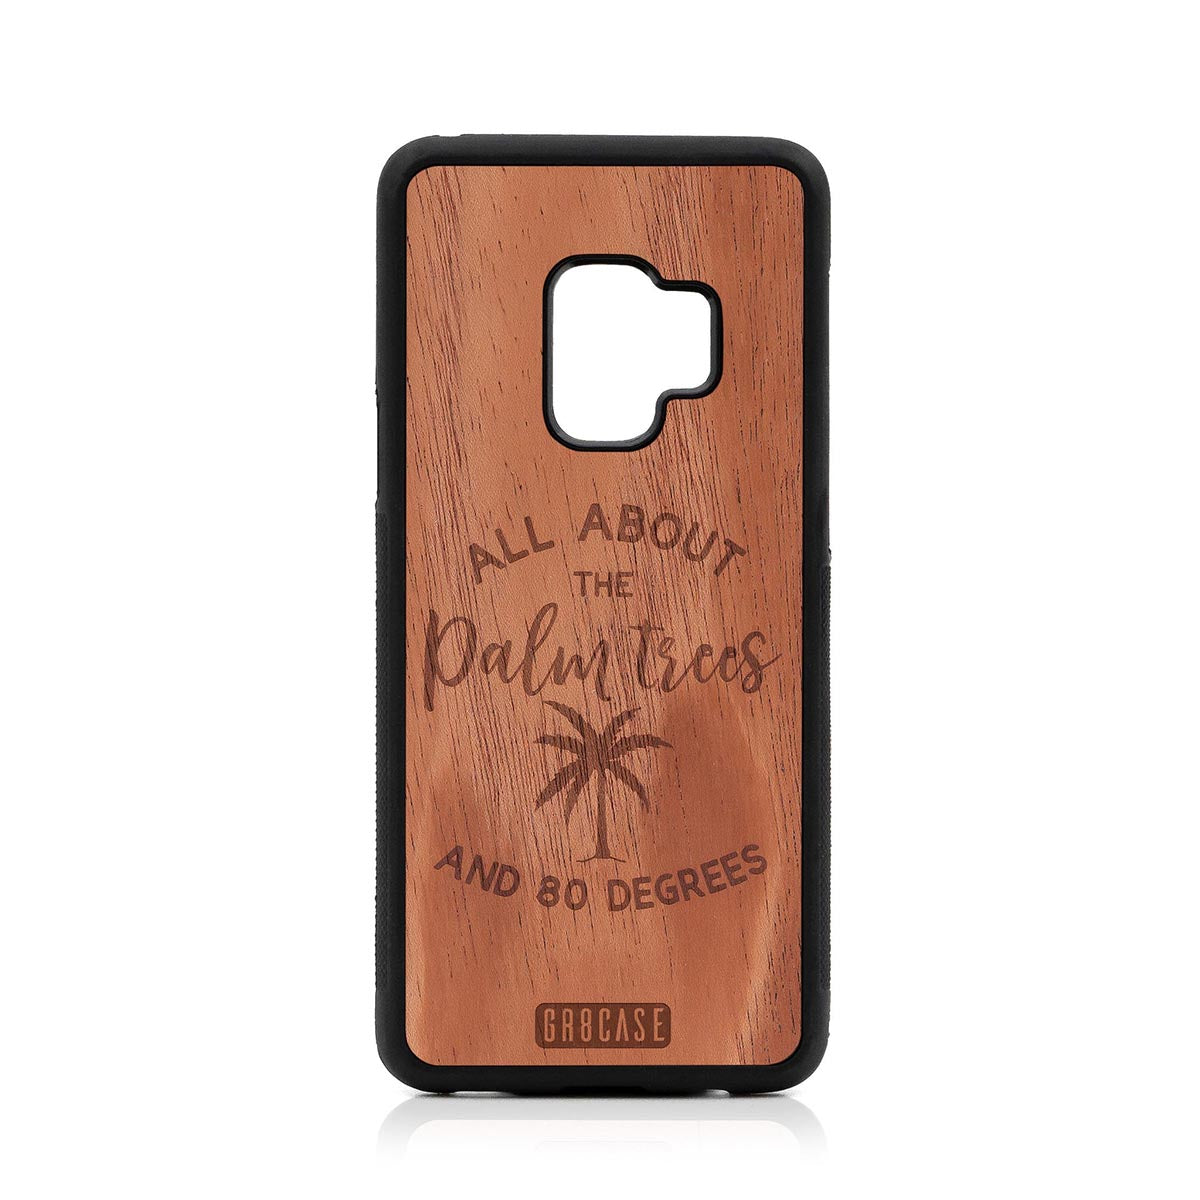 All About The Palm Trees and 80 Degrees Design Wood Case For Samsung Galaxy S9 by GR8CASE